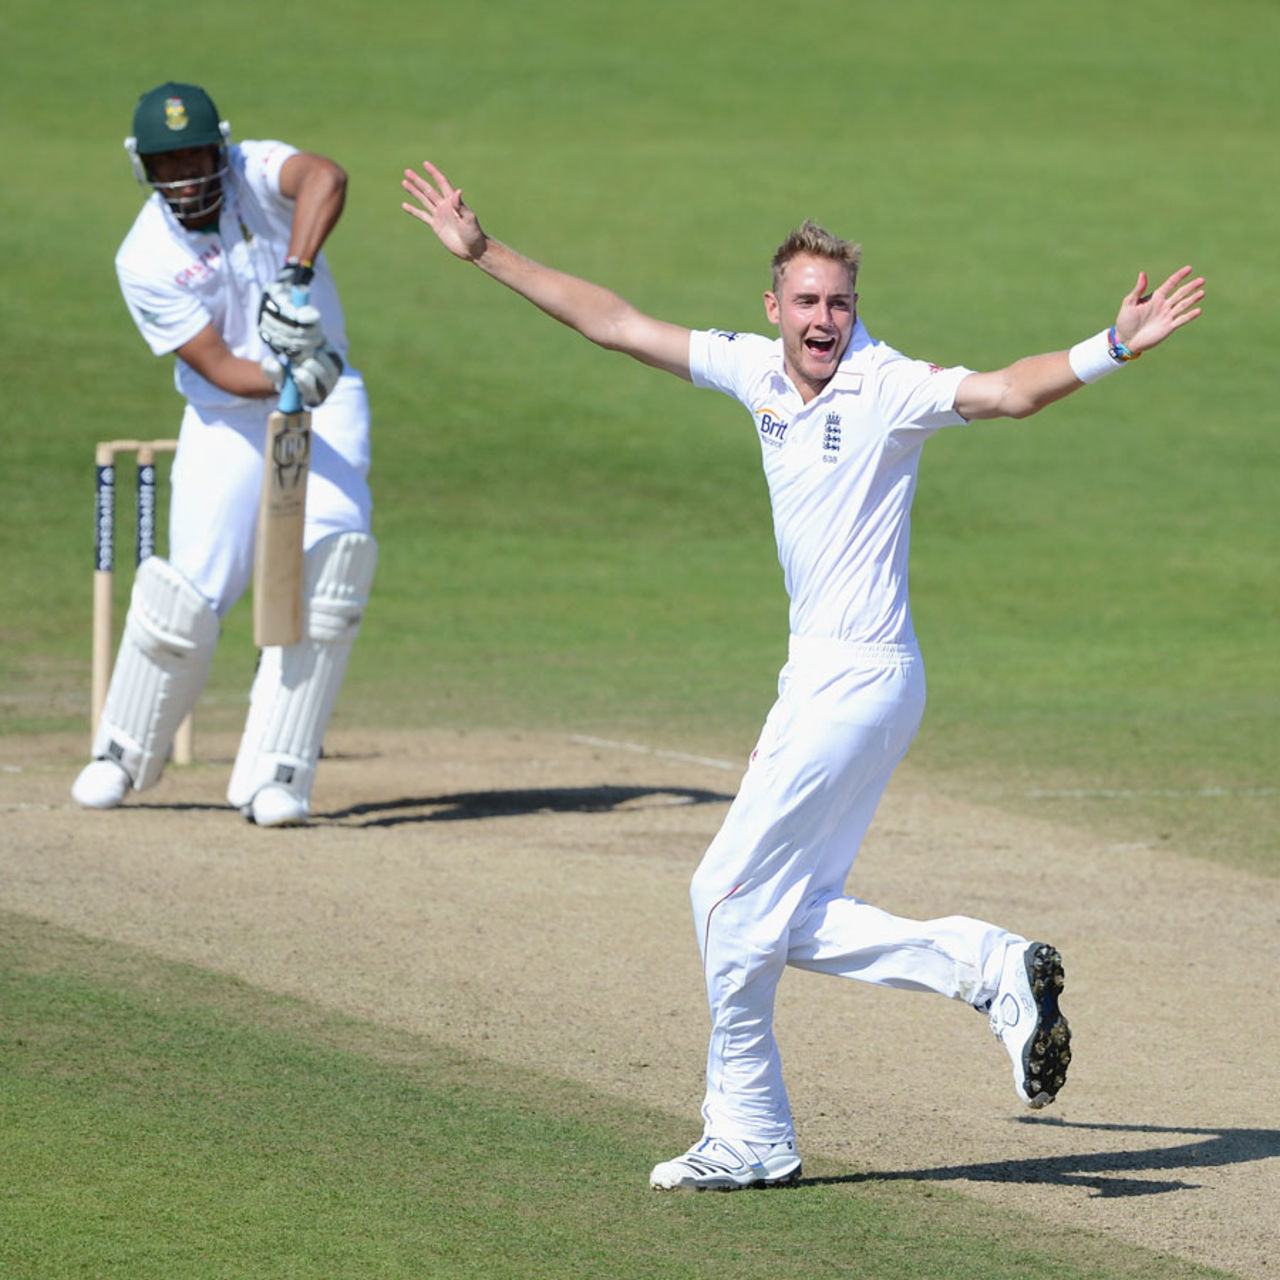 Stuart Broad appeals successfully for the wicket of Vernon Philander, England v South Africa, 2nd Investec Test, Headingley, 5th day, August 6, 2012